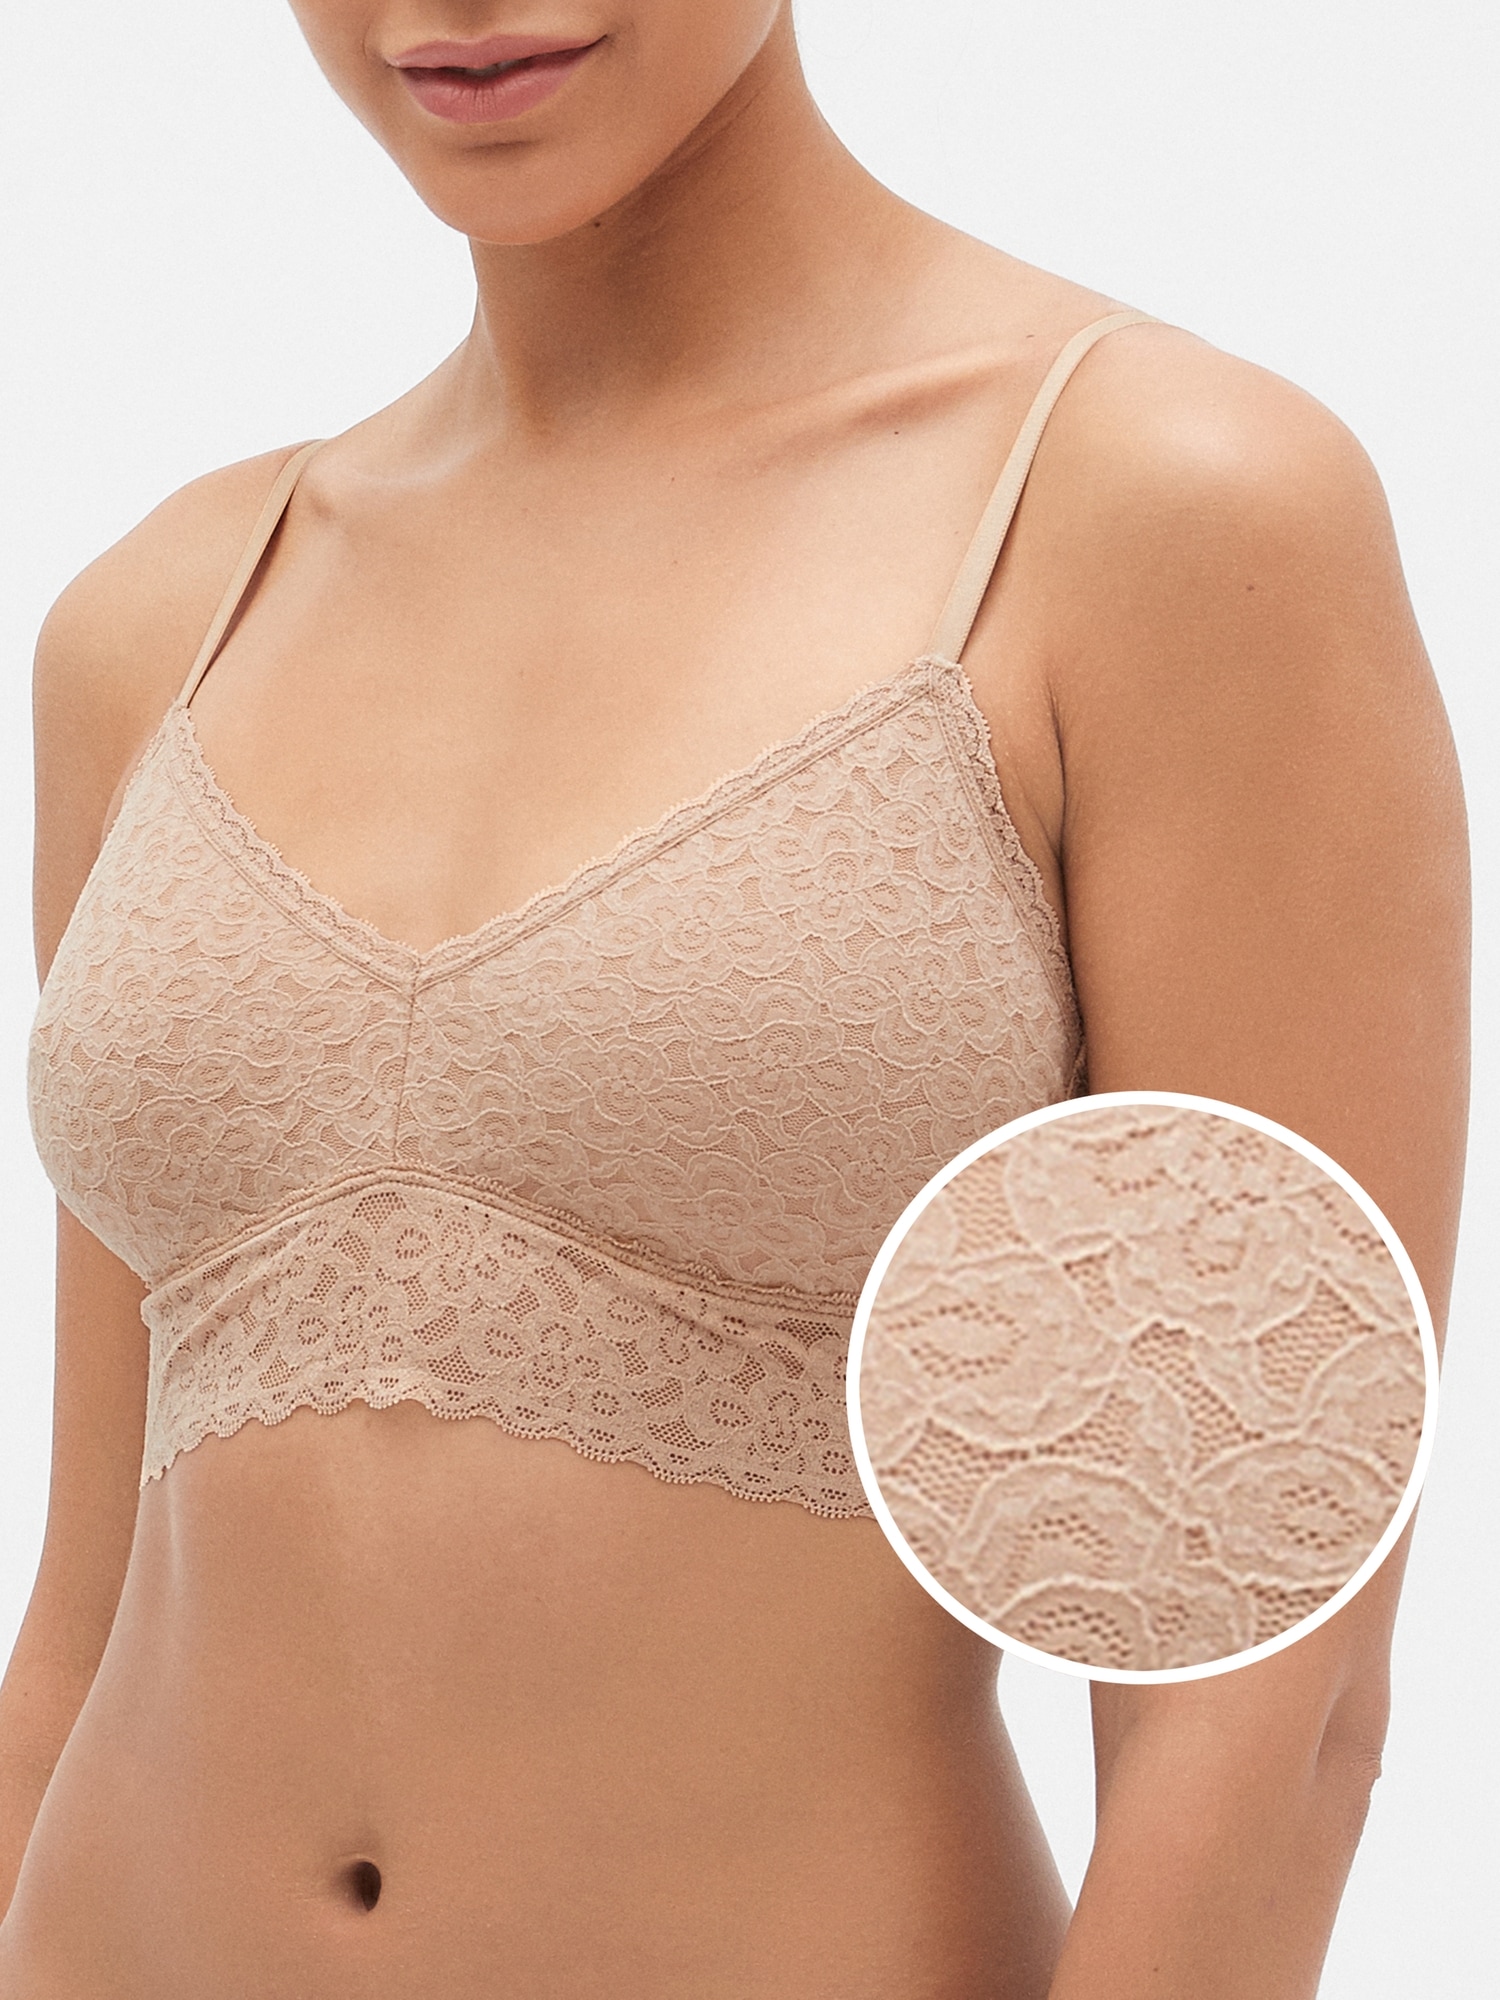 Gap Factory NWT Lace Pullover Bralette XS S $25